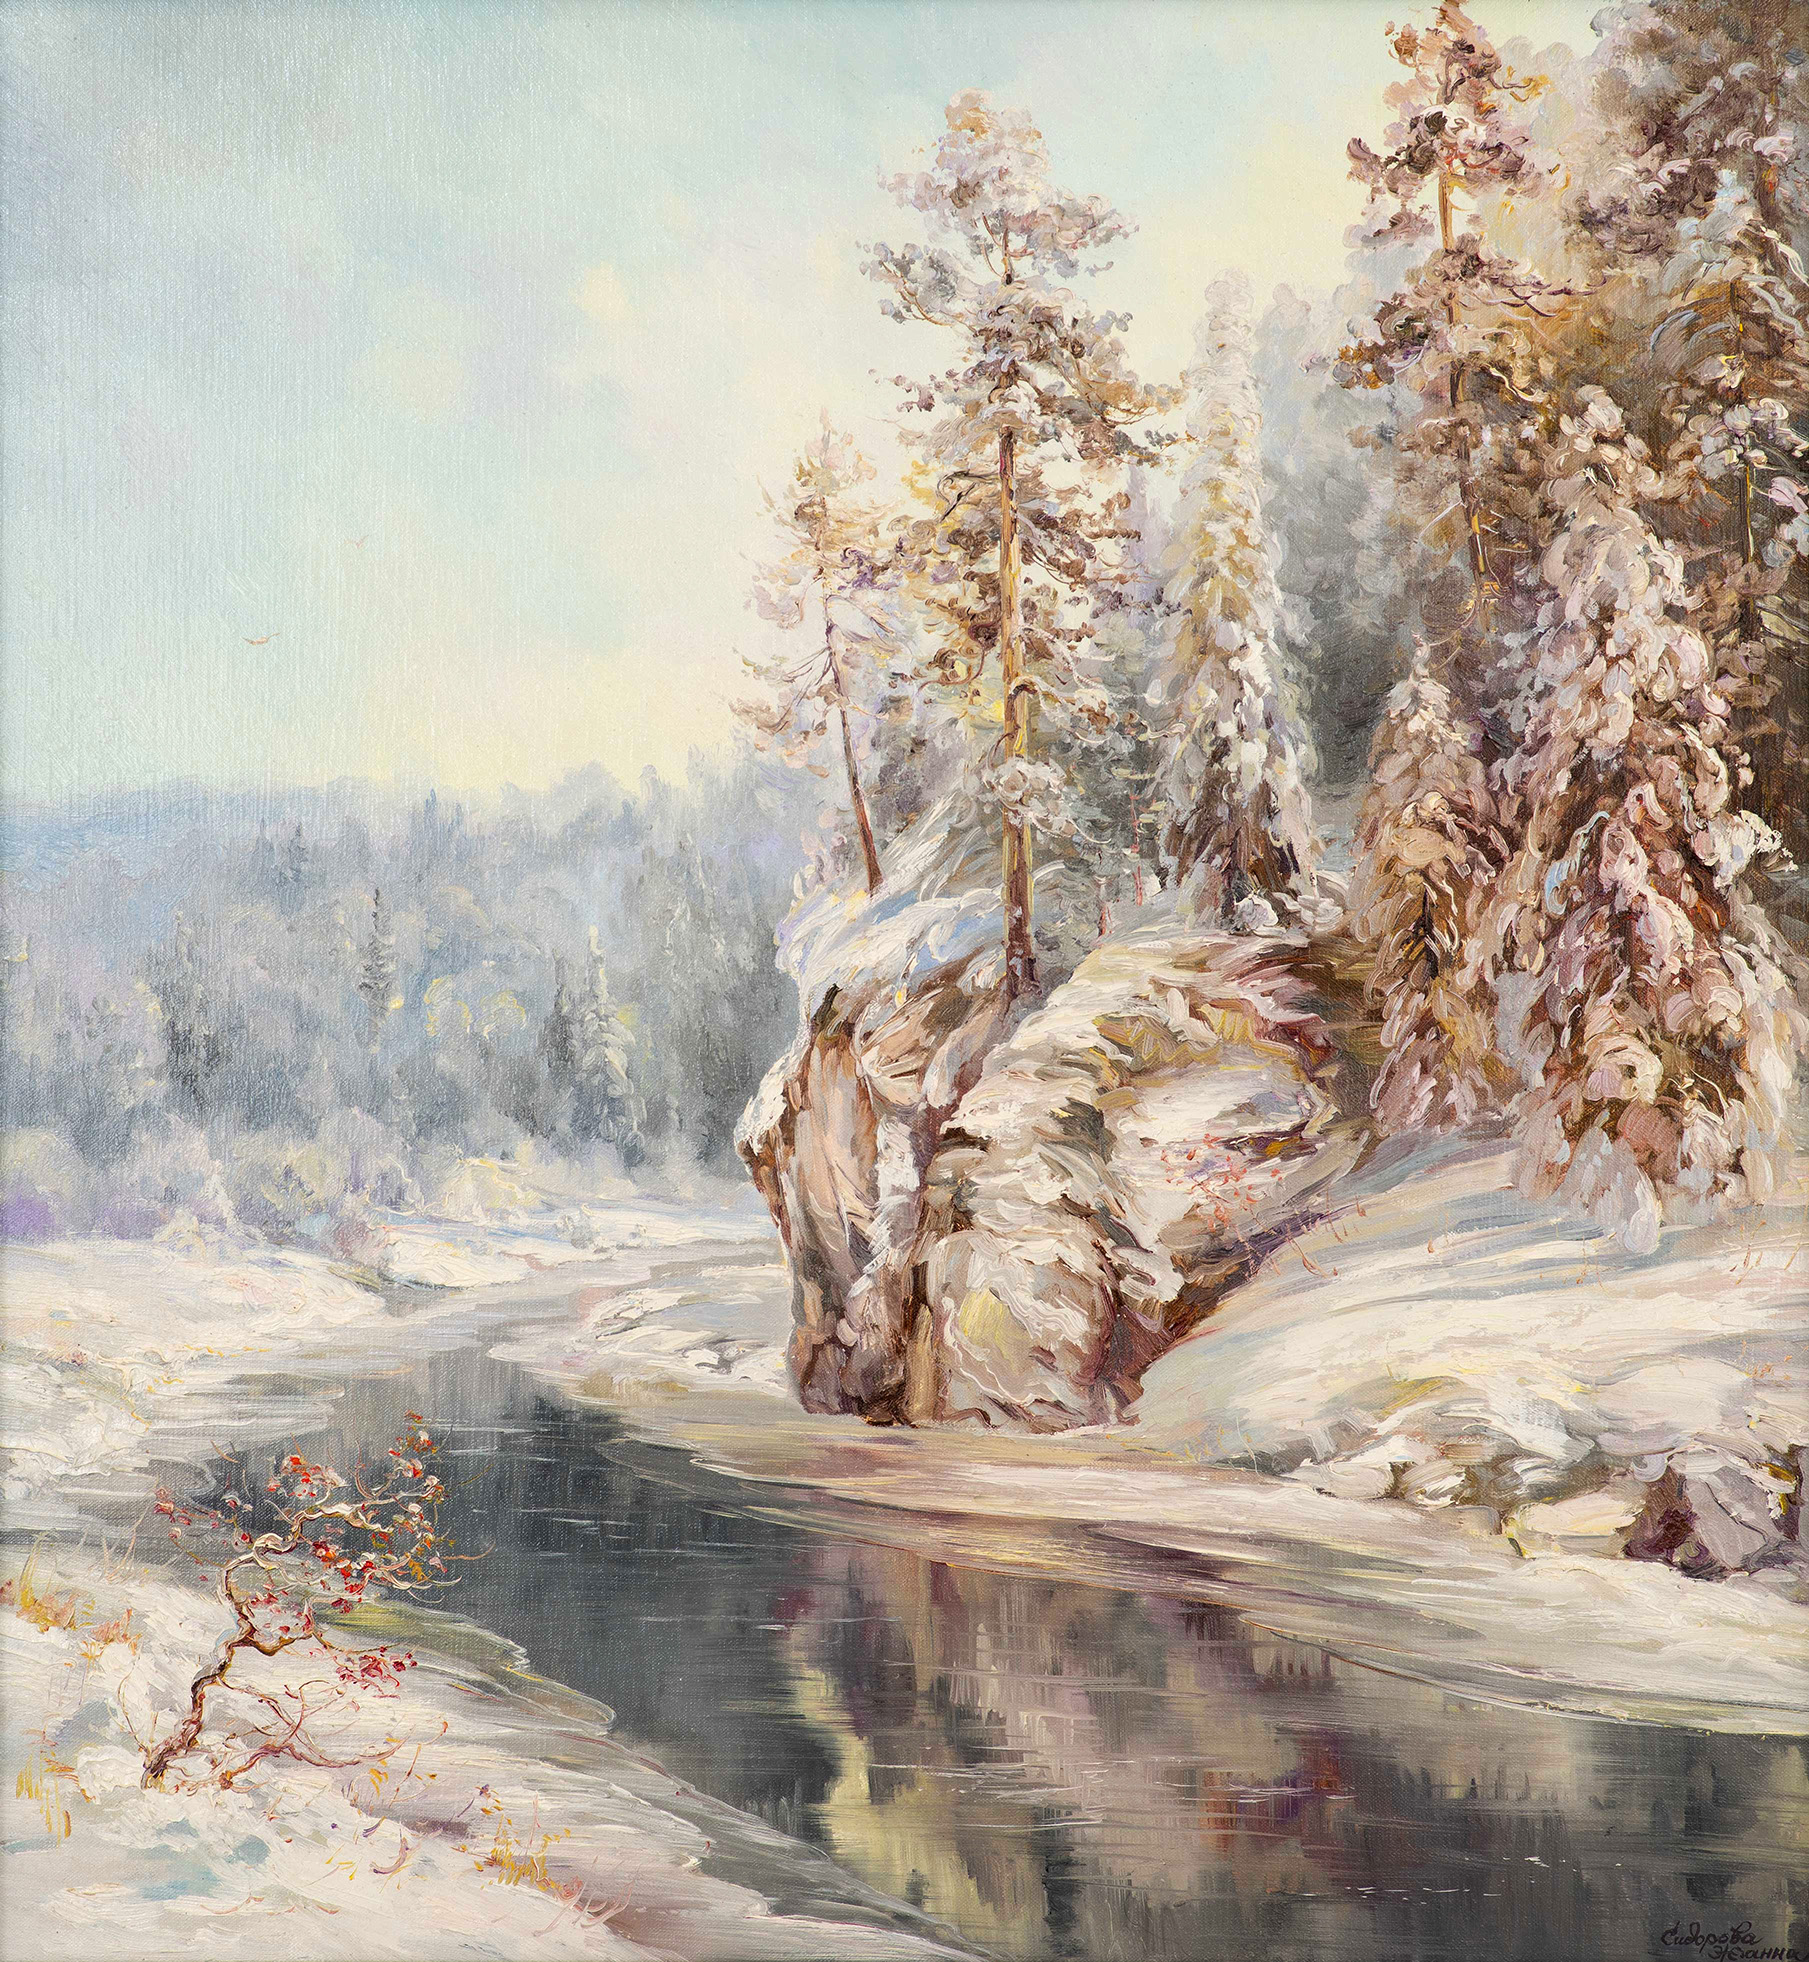 Nature Feels Warmer in Snowy Coat - 1, Zhanna Sidorova, Buy the painting Oil